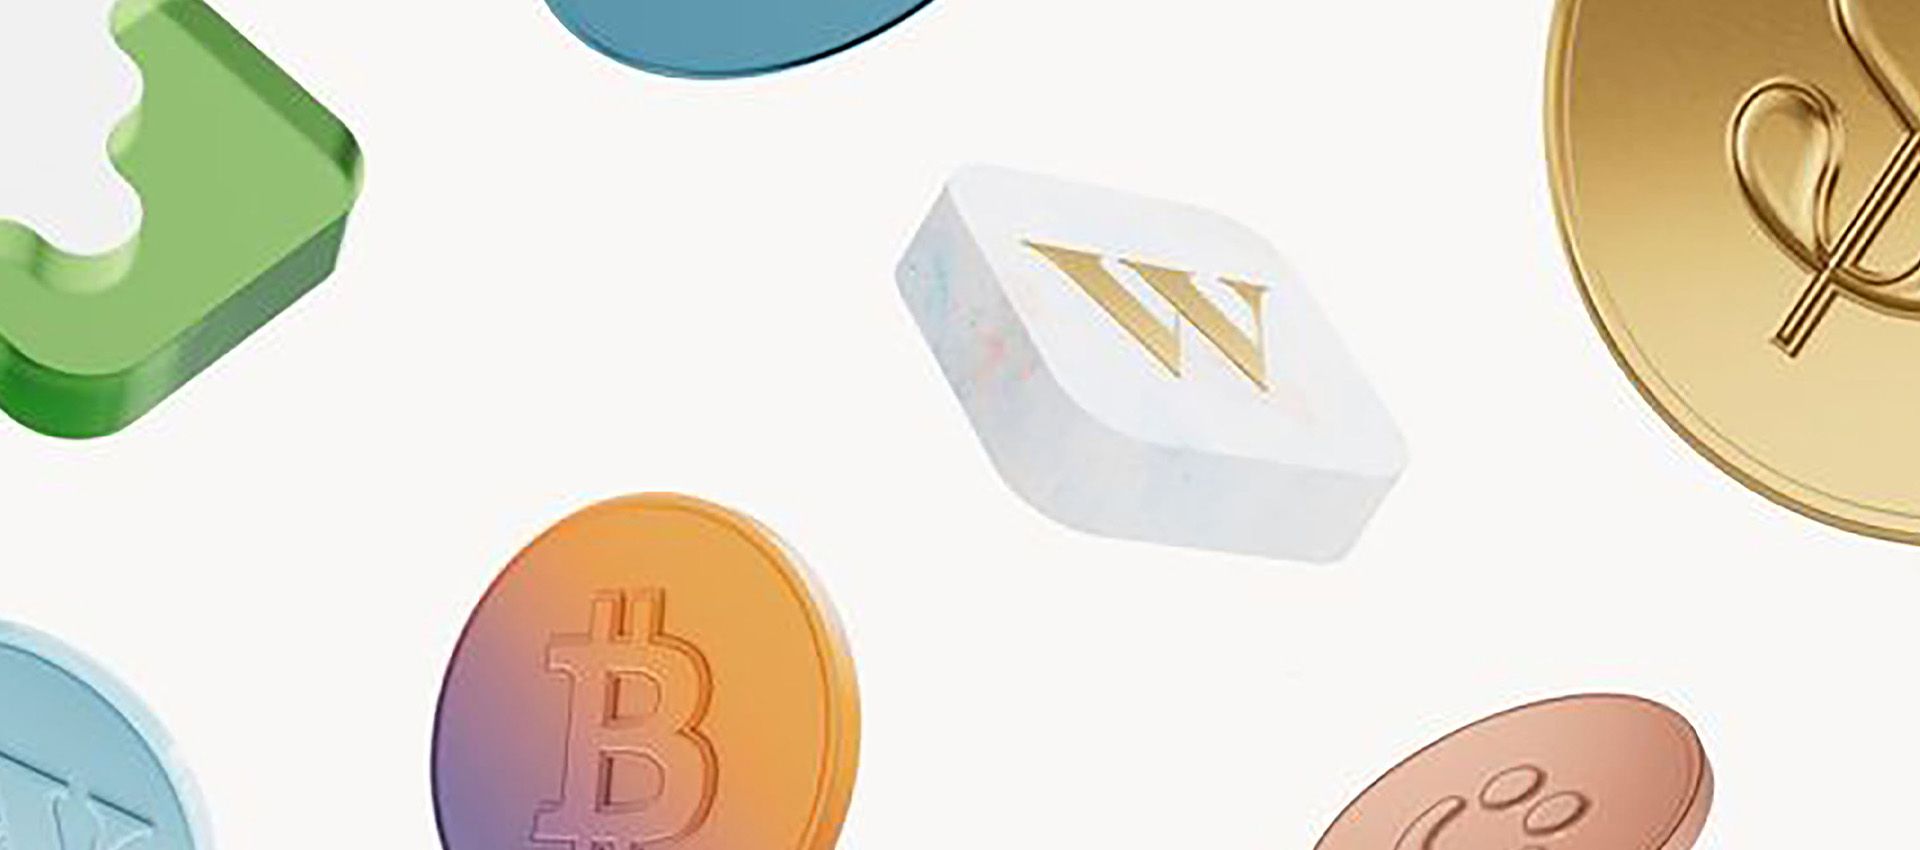 Abstract image of 3d app icons floating in the air against a white backdrop including Wealthsimple app icon and bitcoin icon